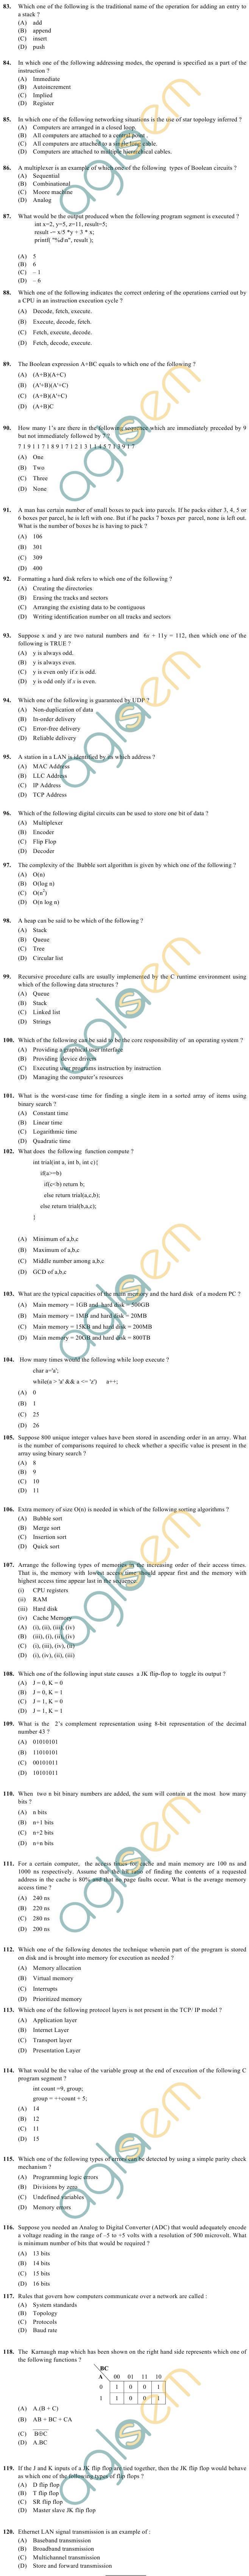 OJEE 2013 Question Paper for LE MCA